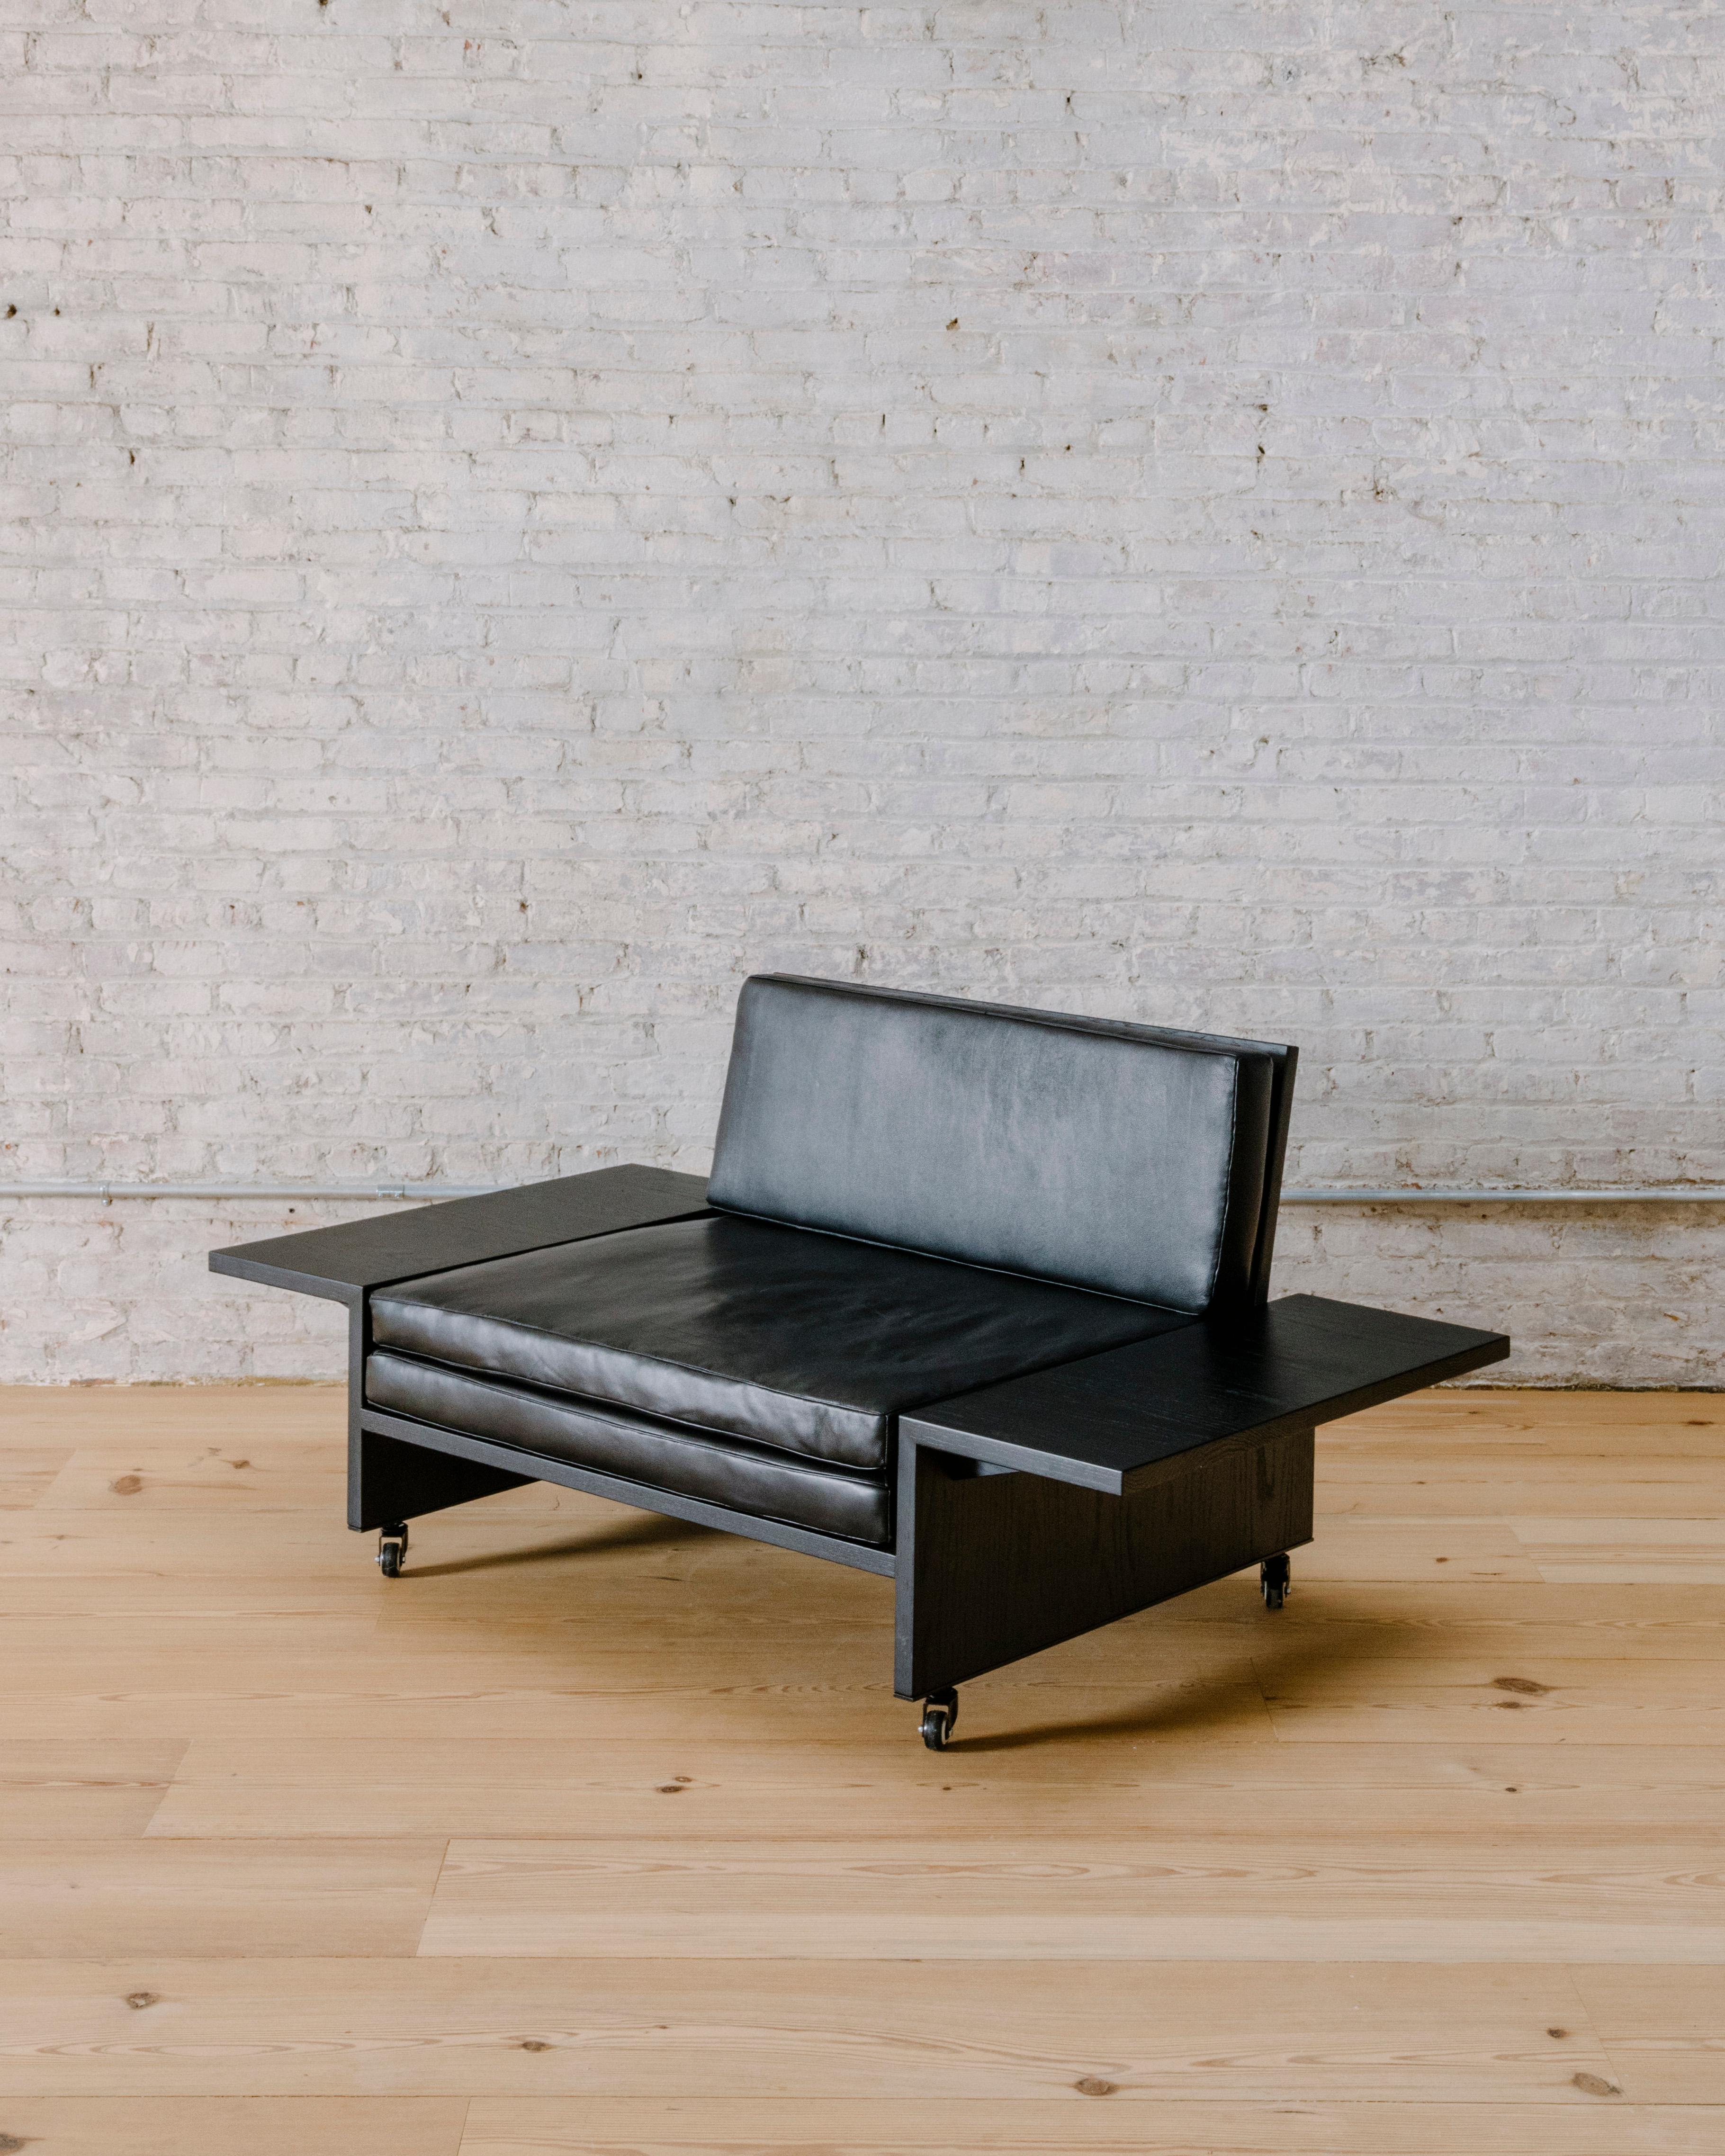 Constructed from charred ash boards, the minimal Domino armchair by Brooklyn-based Mock Studio rethinks the idea of an armrest as side table. Low and loungey, mounted on wheels and wide enough to call itself a love seat, this piece belongs in a